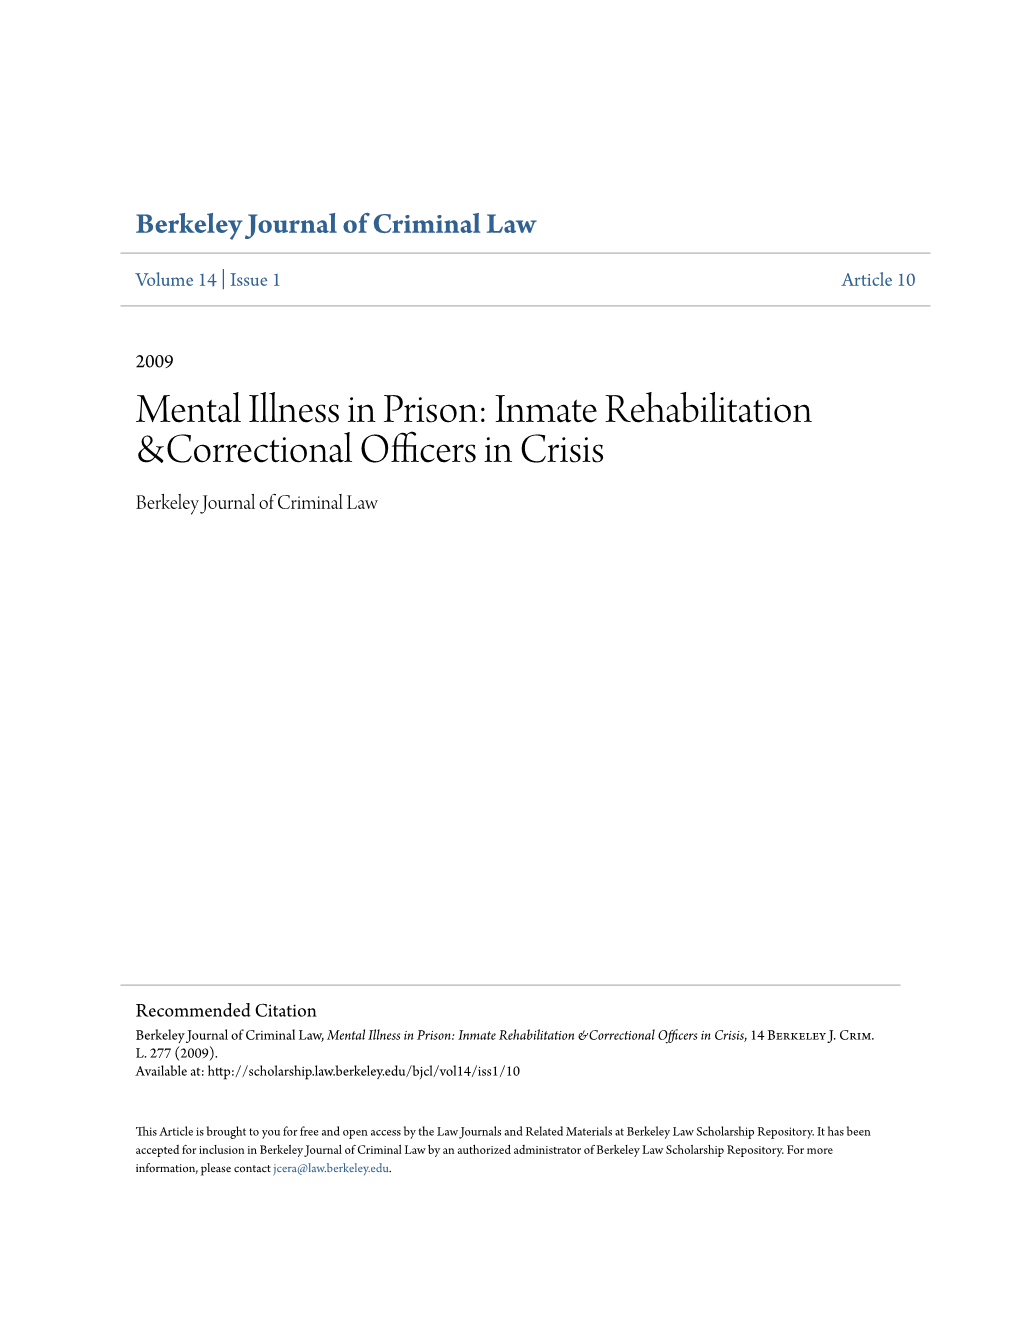 Mental Illness in Prison: Inmate Rehabilitation &Correctional Officers in Crisis Berkeley Journal of Criminal Law